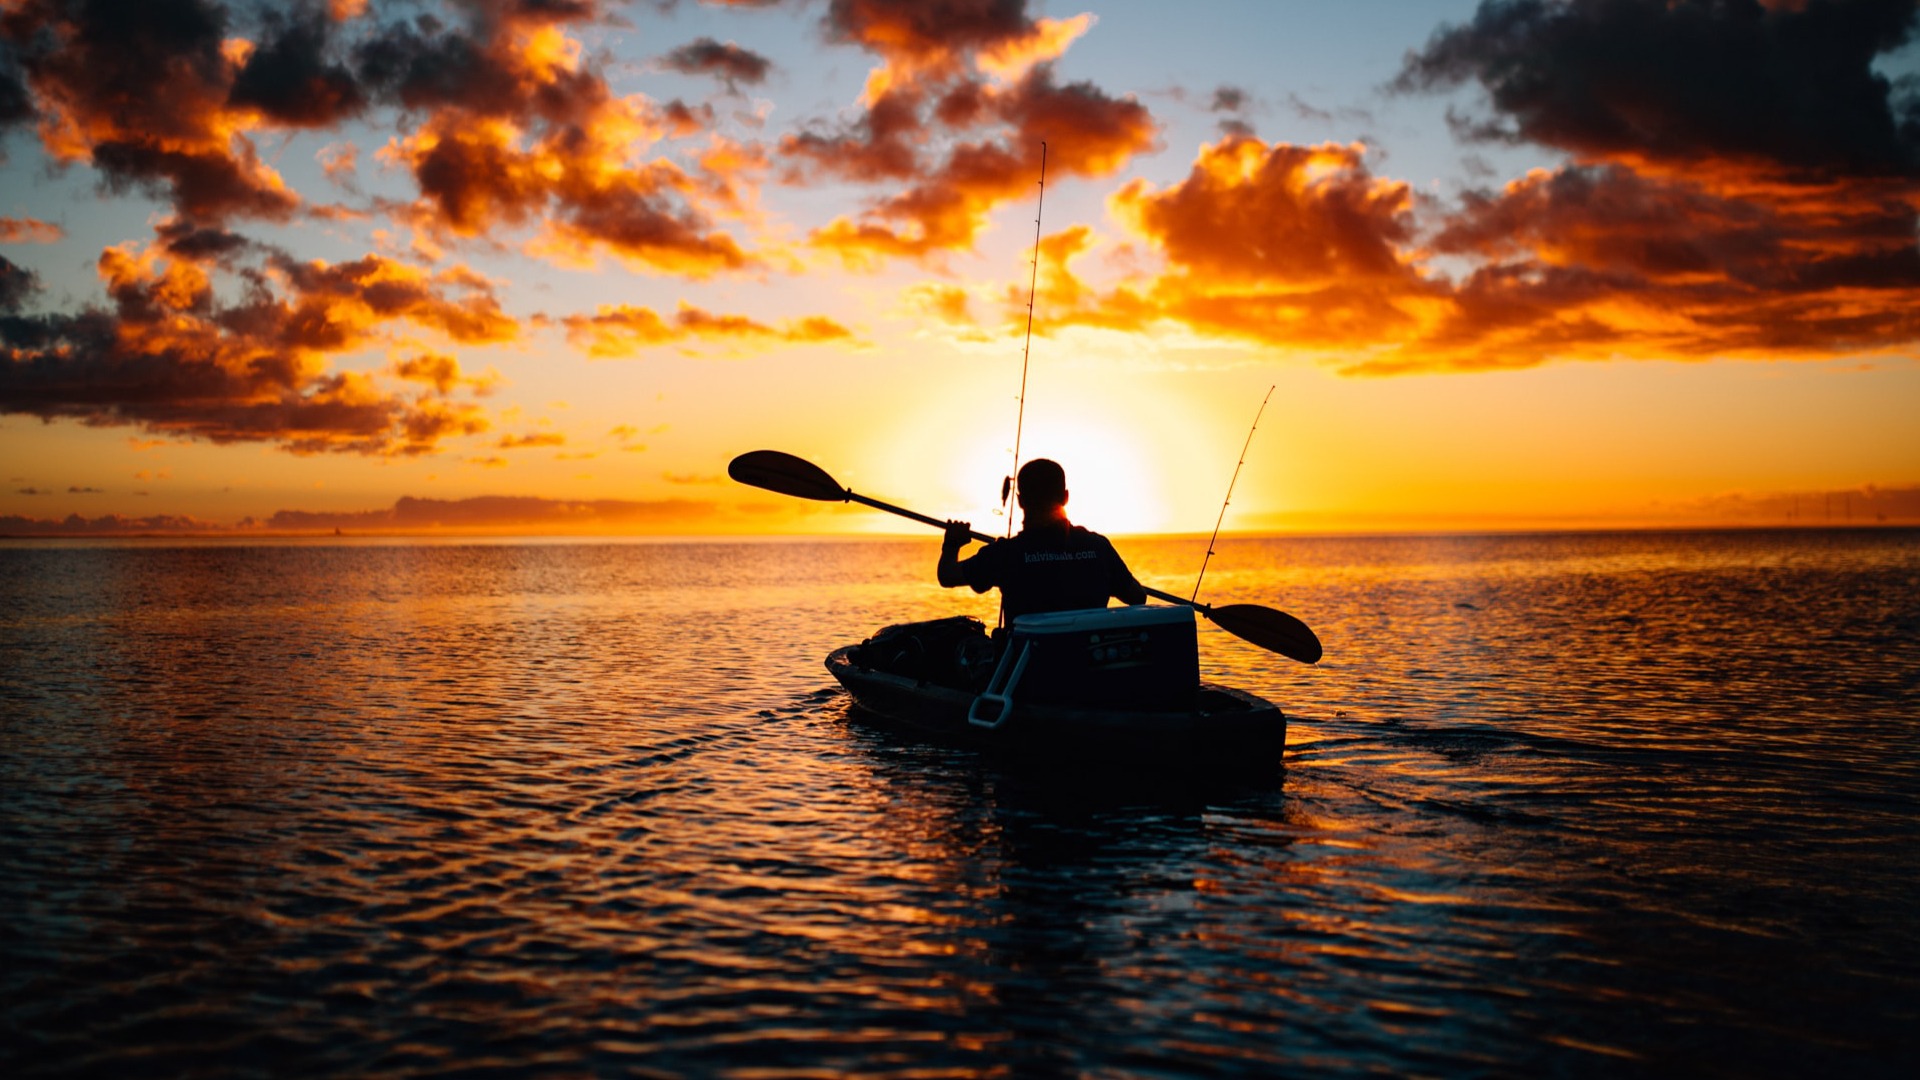 getting the best kayak fish finder for your money can help make memorable fishing trips